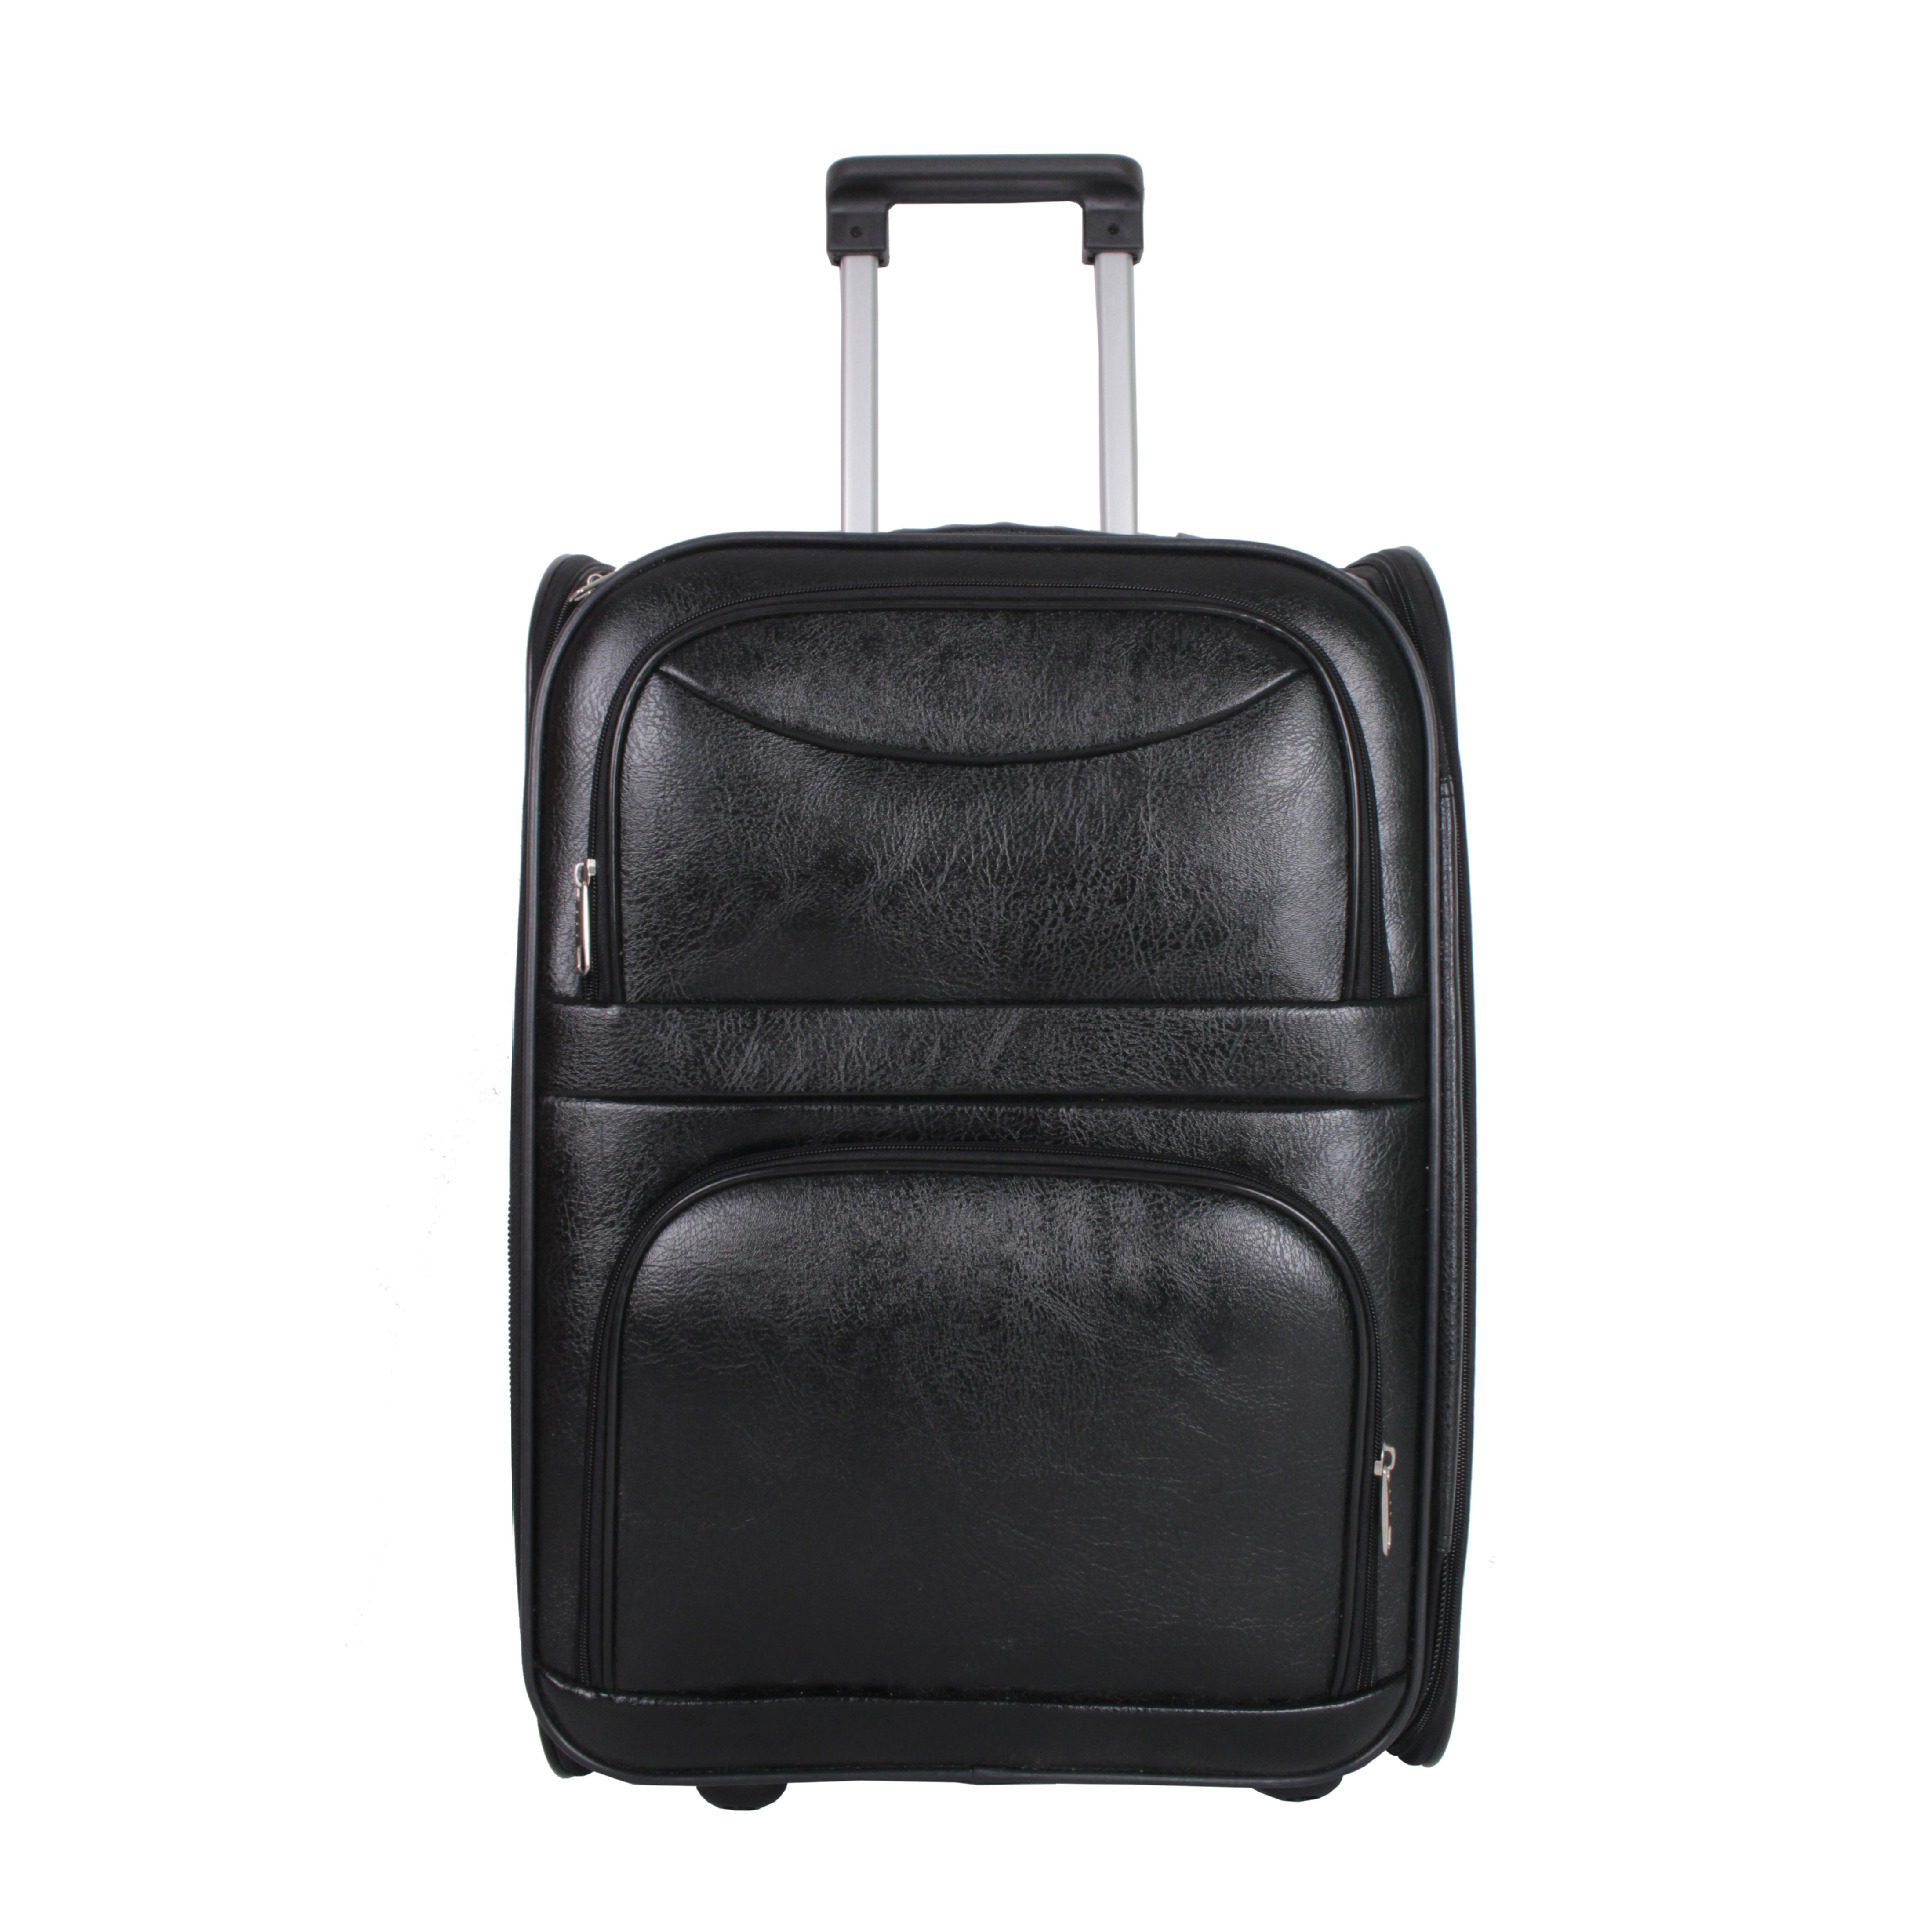 Artificial Leather Travel Luggage Real Genuine Leather Business trip Trolley Luggage Bag